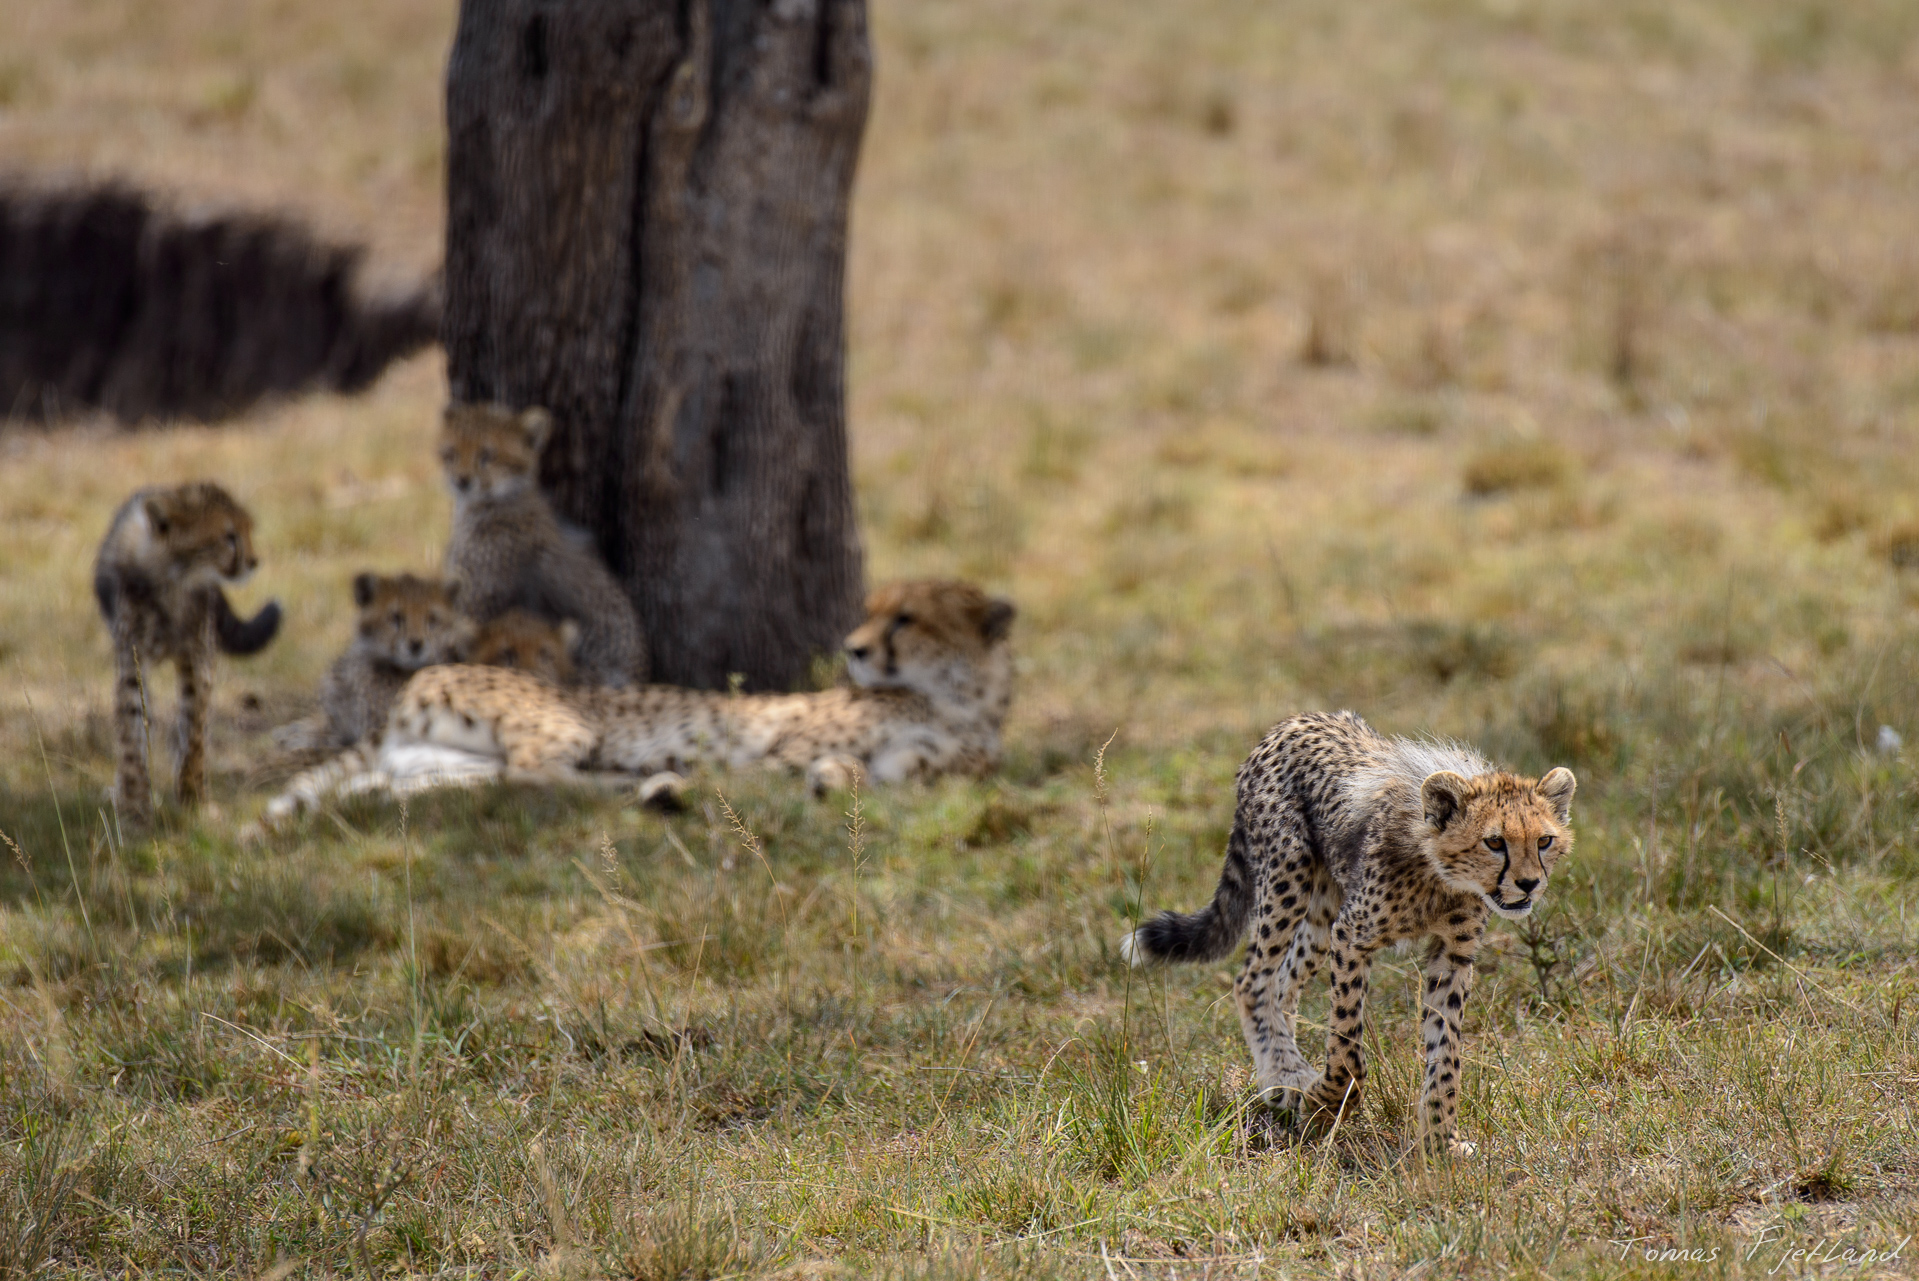 One of Malaikas cubs decides to examine the surroundings alone